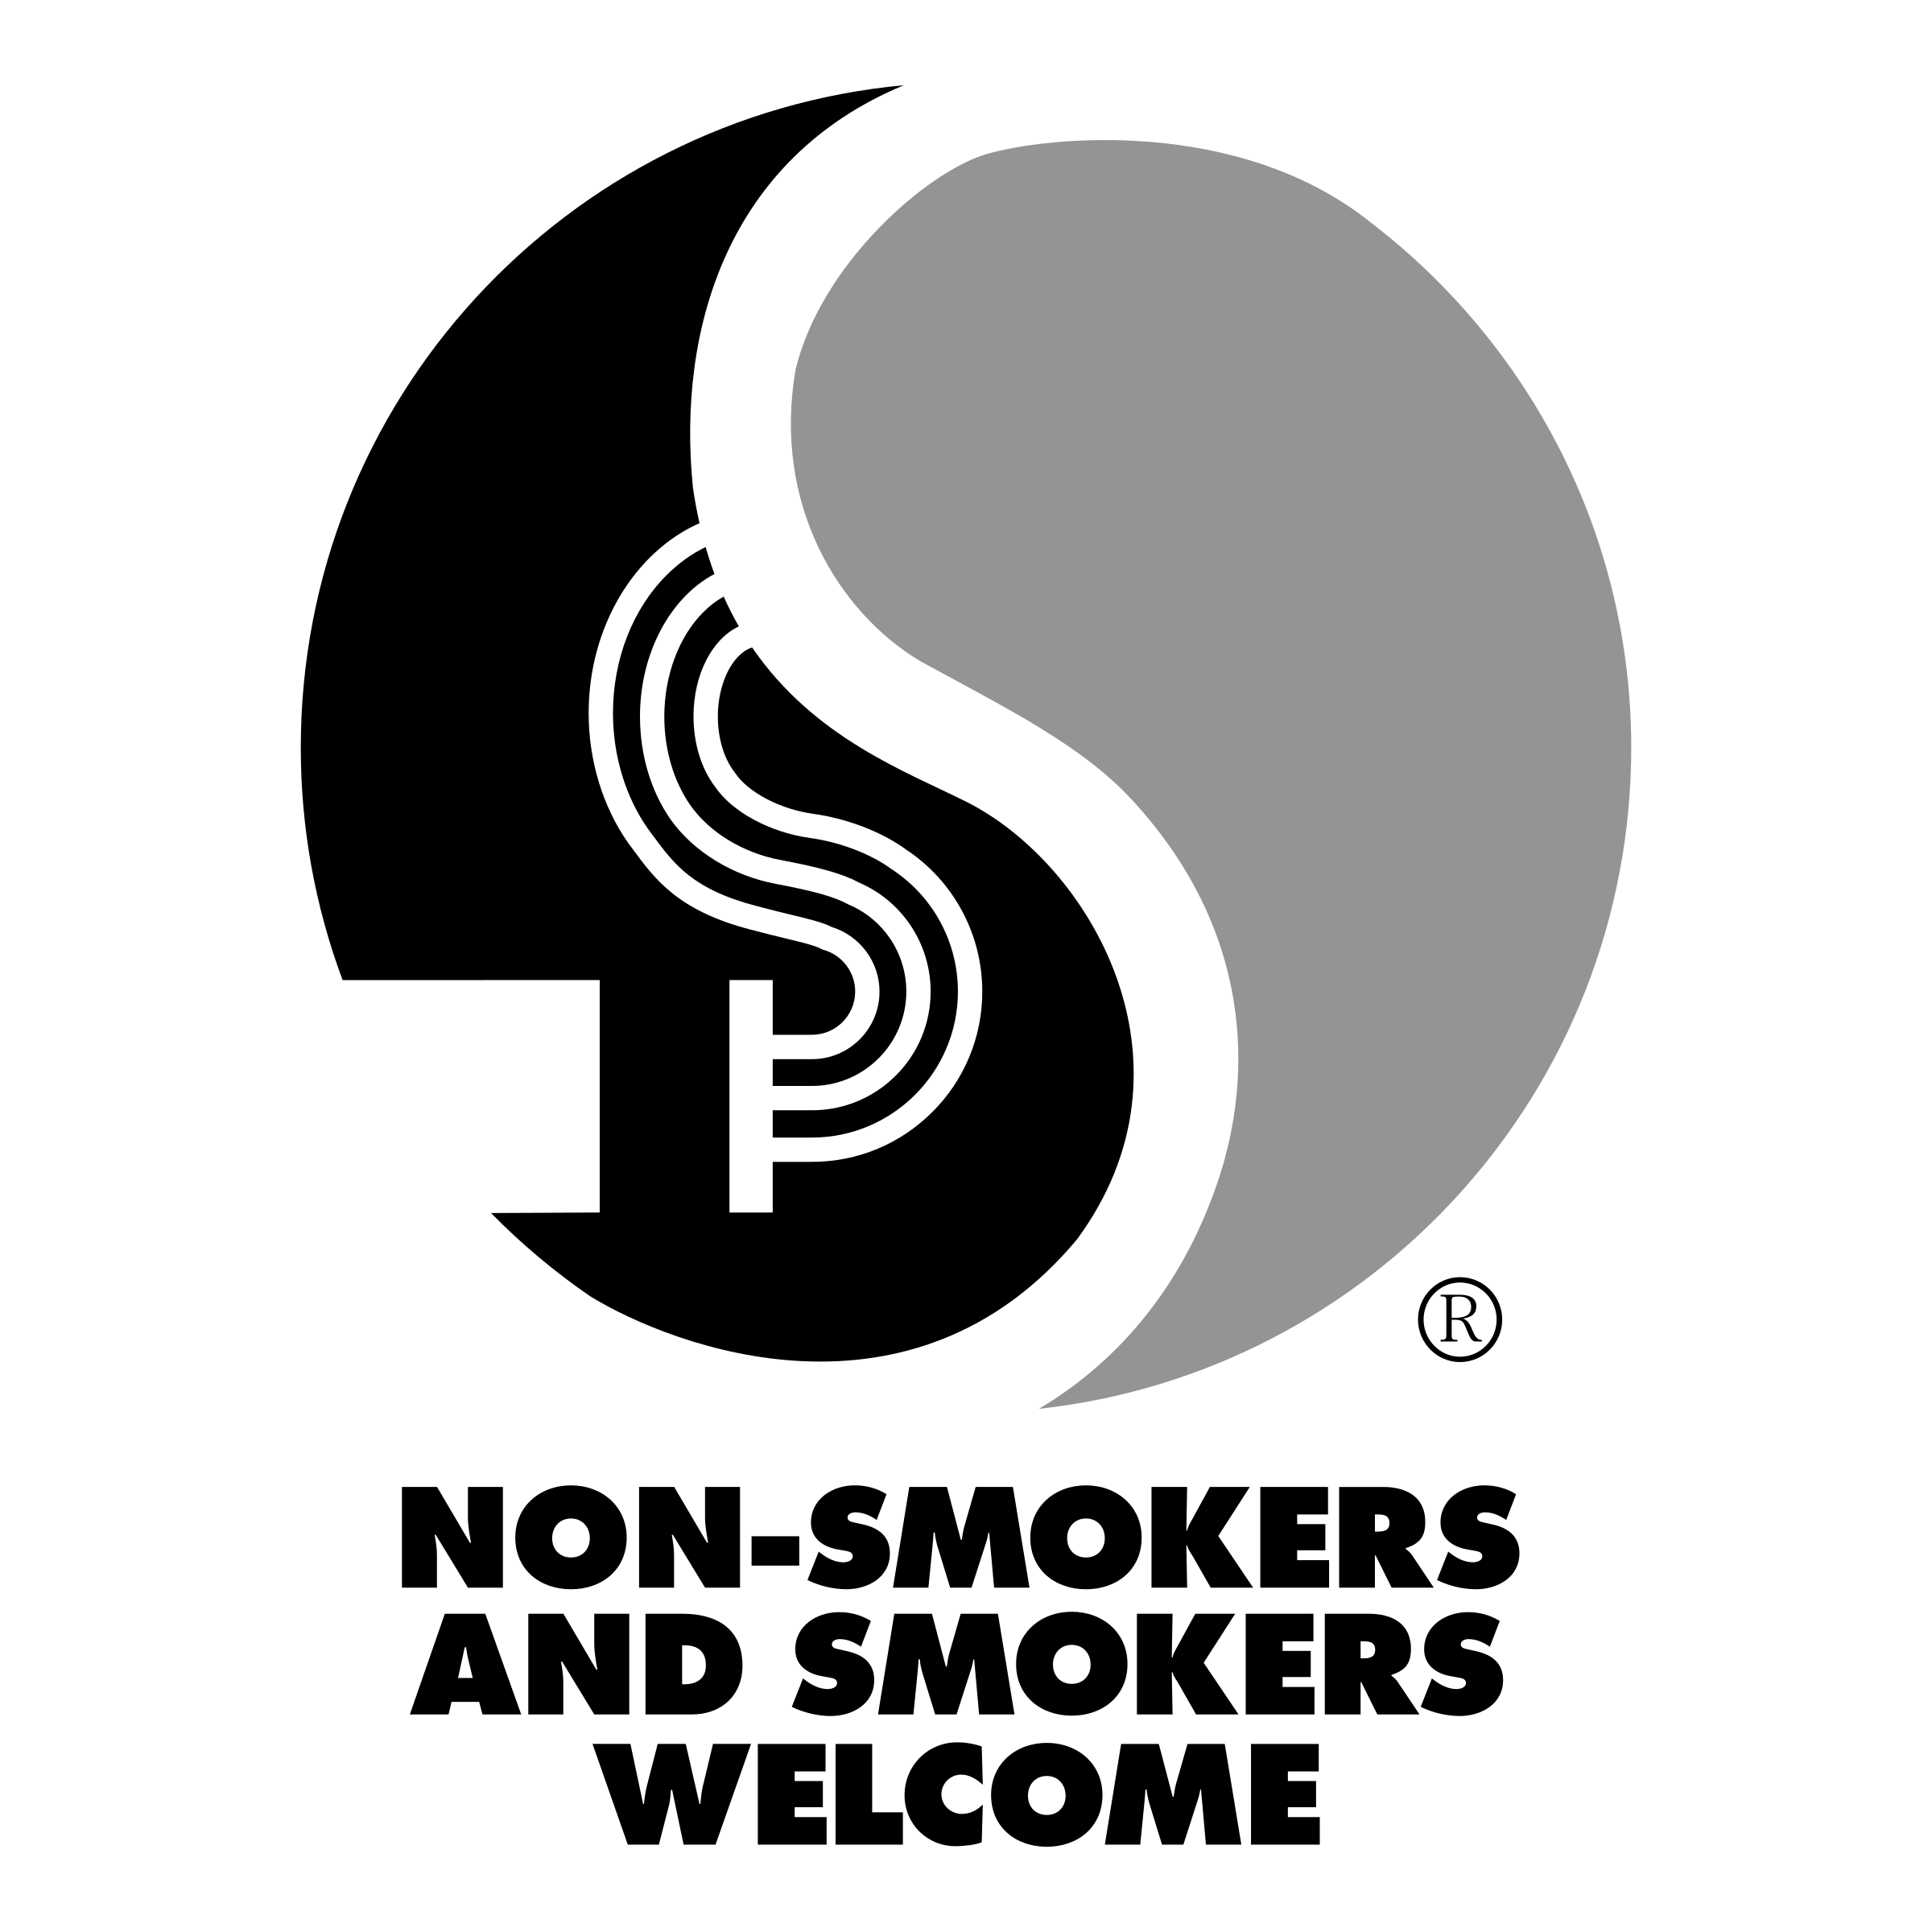 Smokers Logo - Non smokers and smokers welcome Logo PNG Transparent & SVG Vector ...